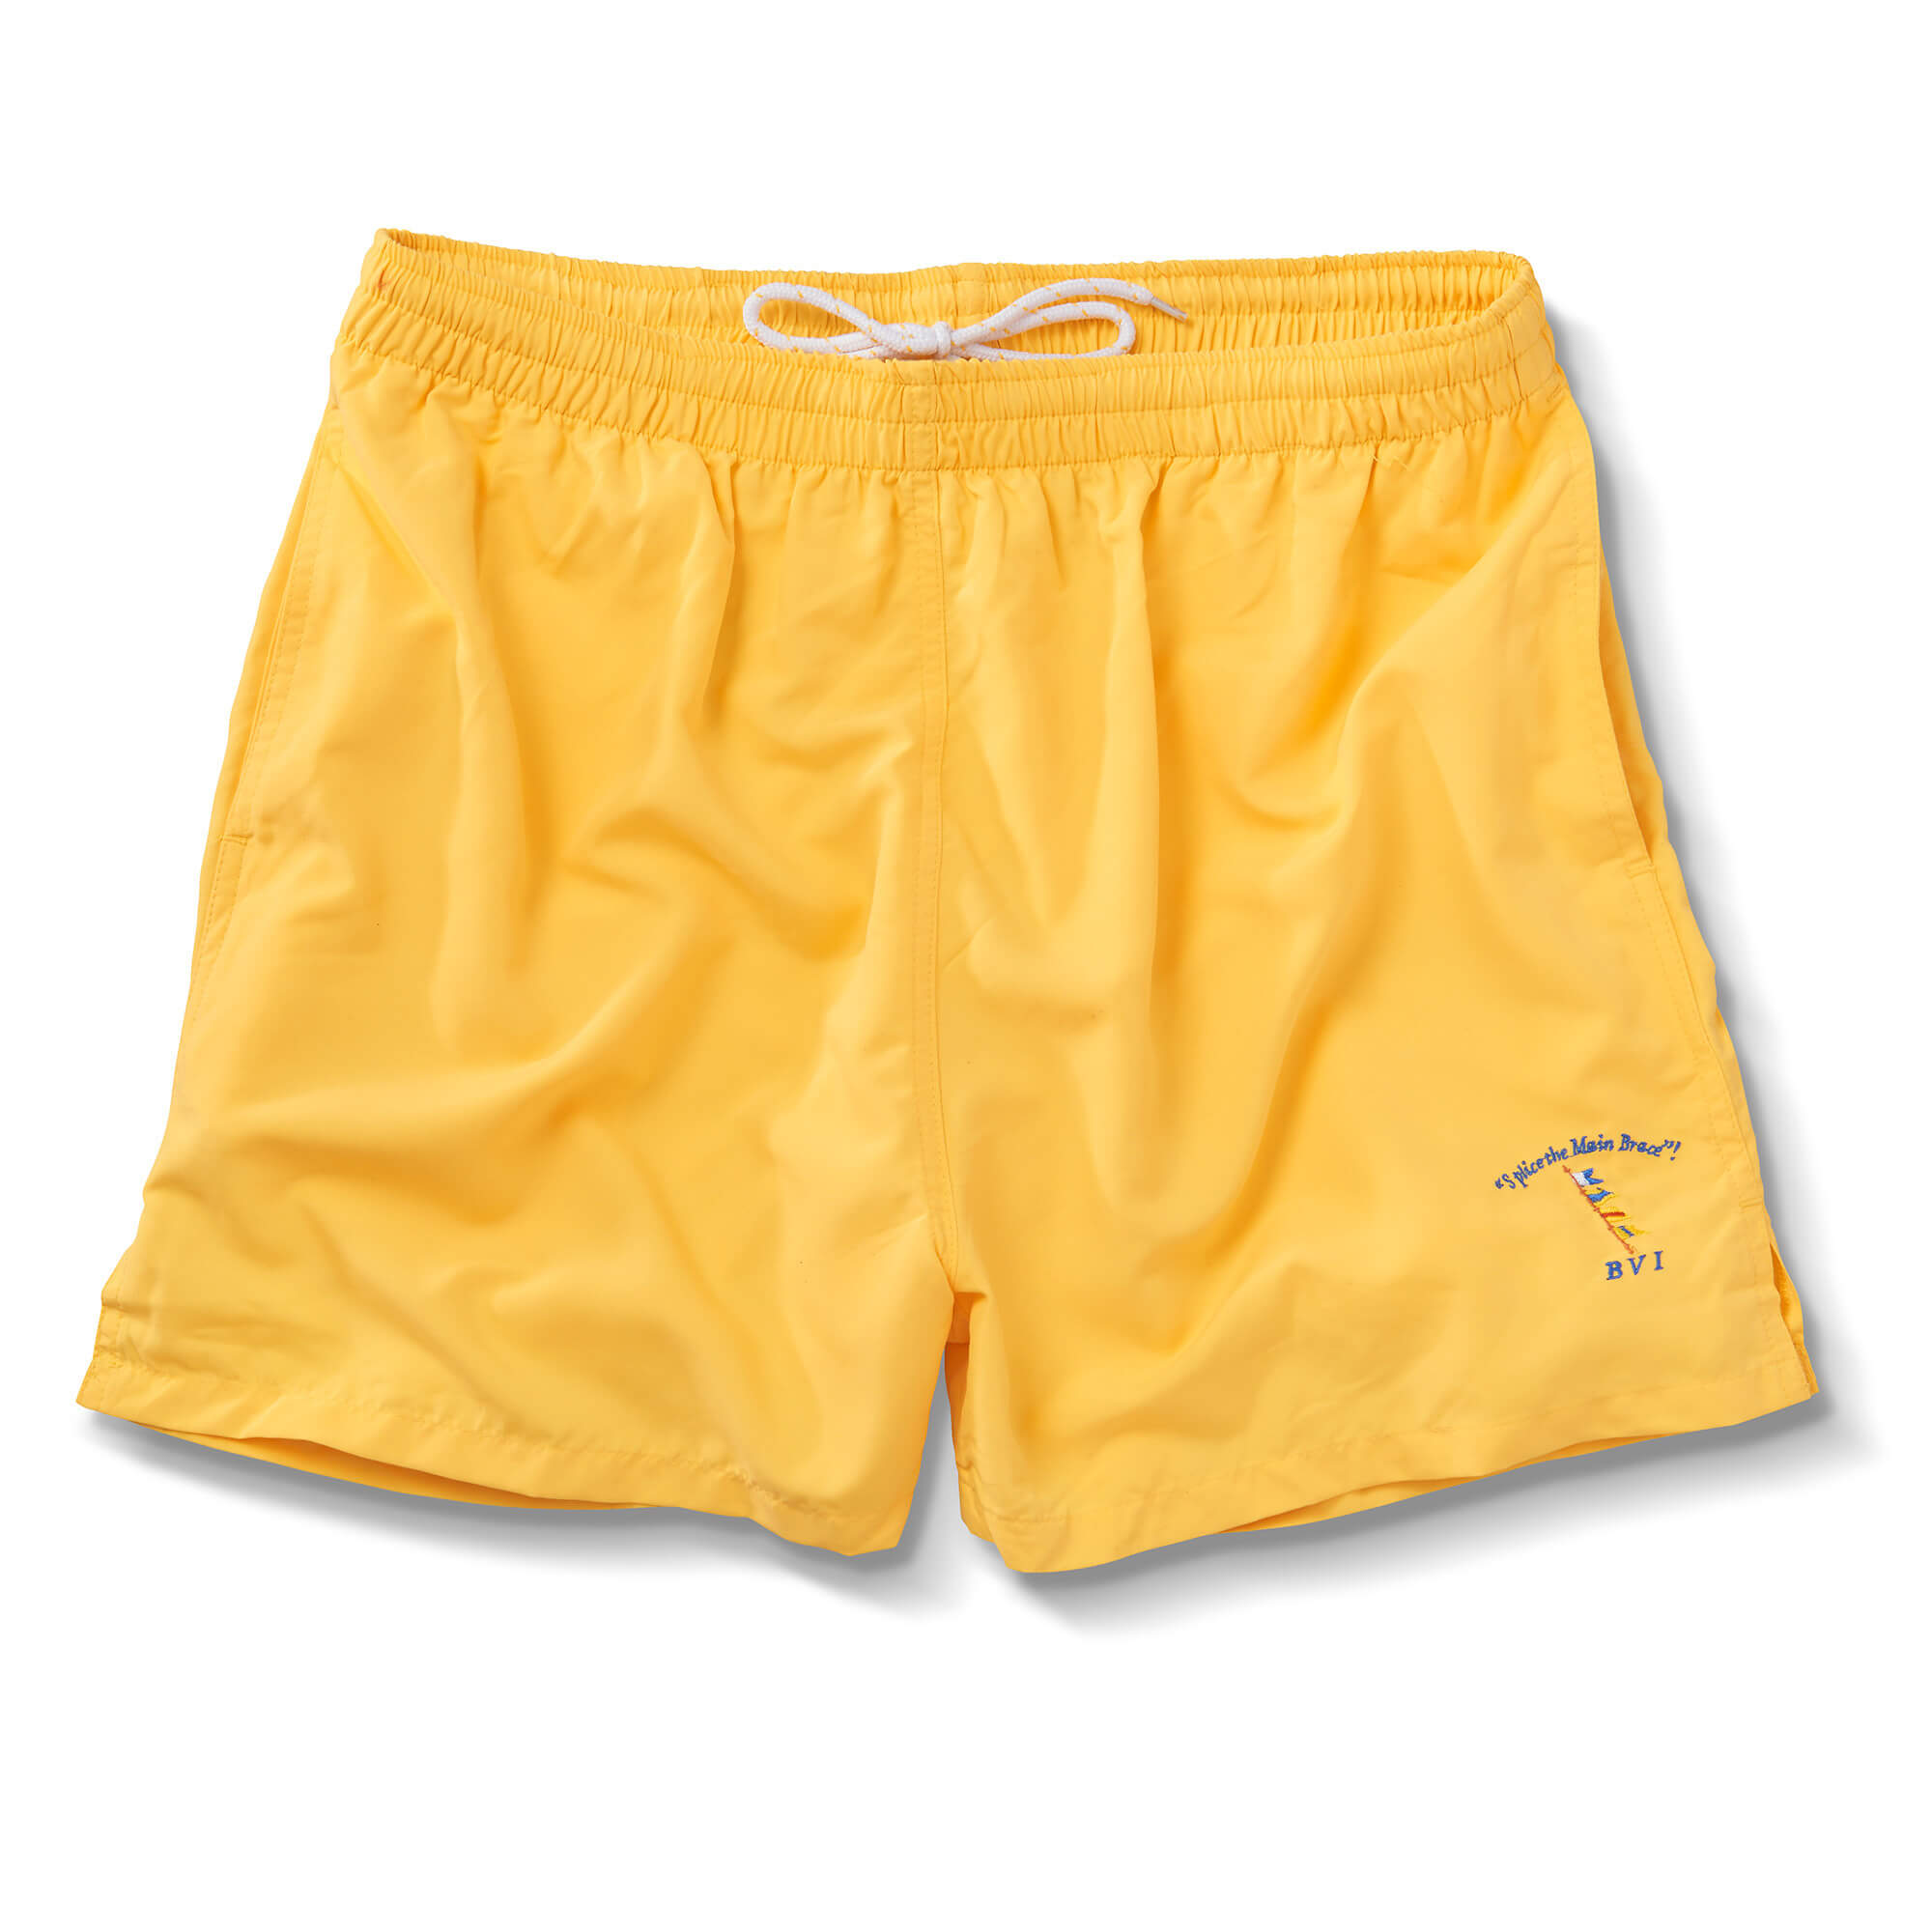 https://pussers.com/wp-content/uploads/2017/07/24239_Mens_Gym_Shorts_Yellow.jpg